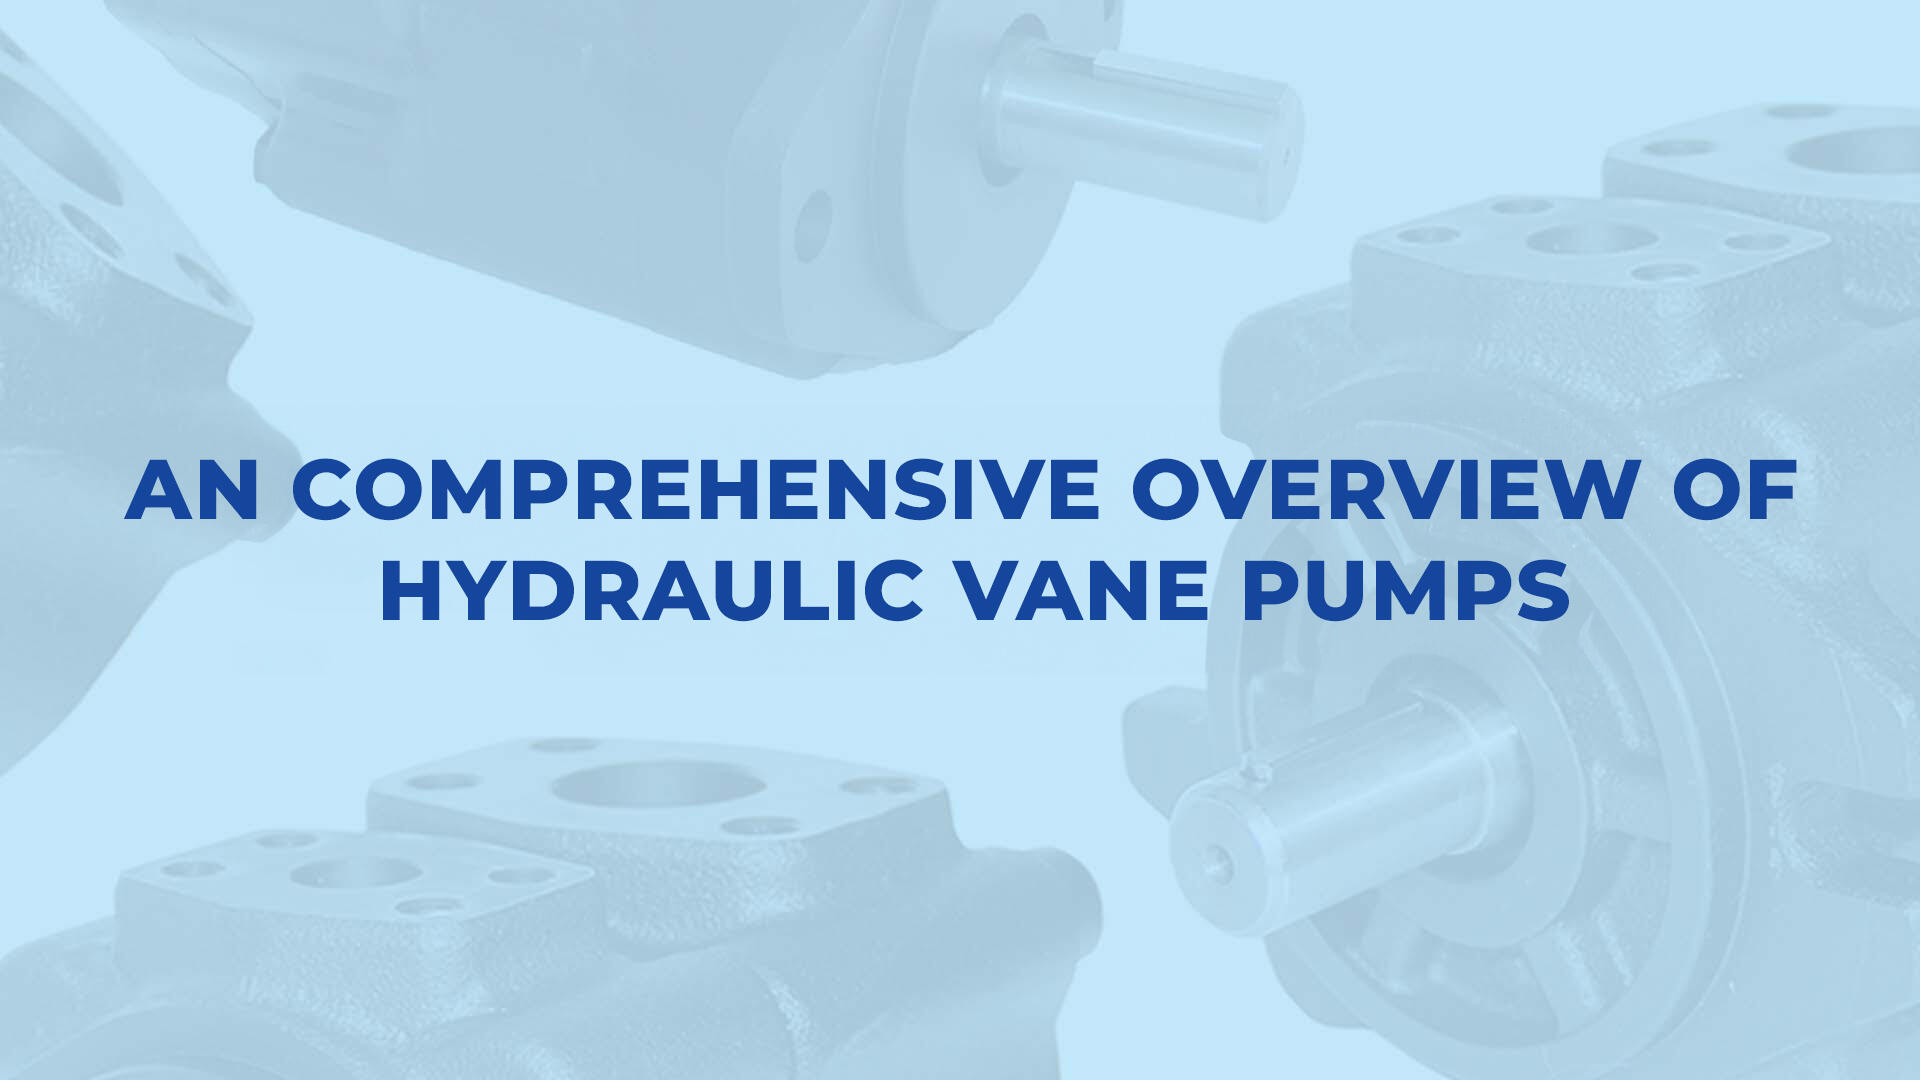 An Comprehensive Overview of Hydraulic Vane Pumps.